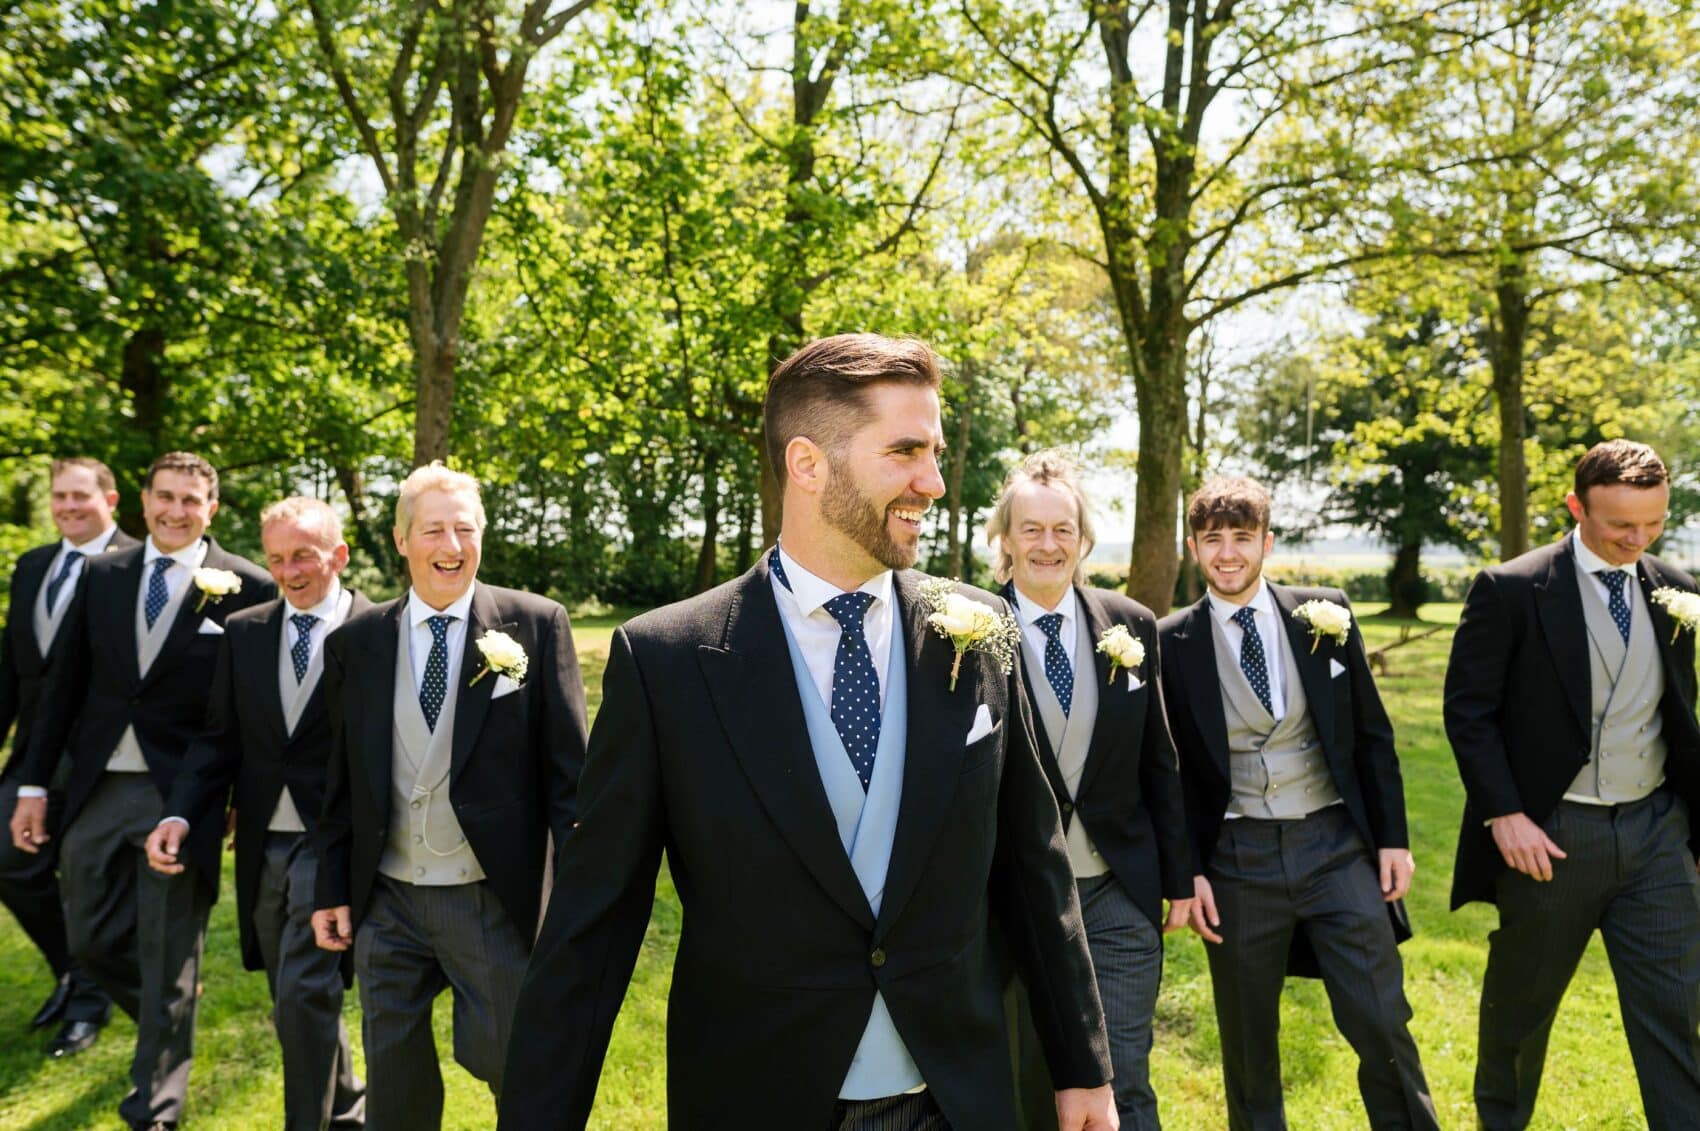 The boys at Abbots Court wedding